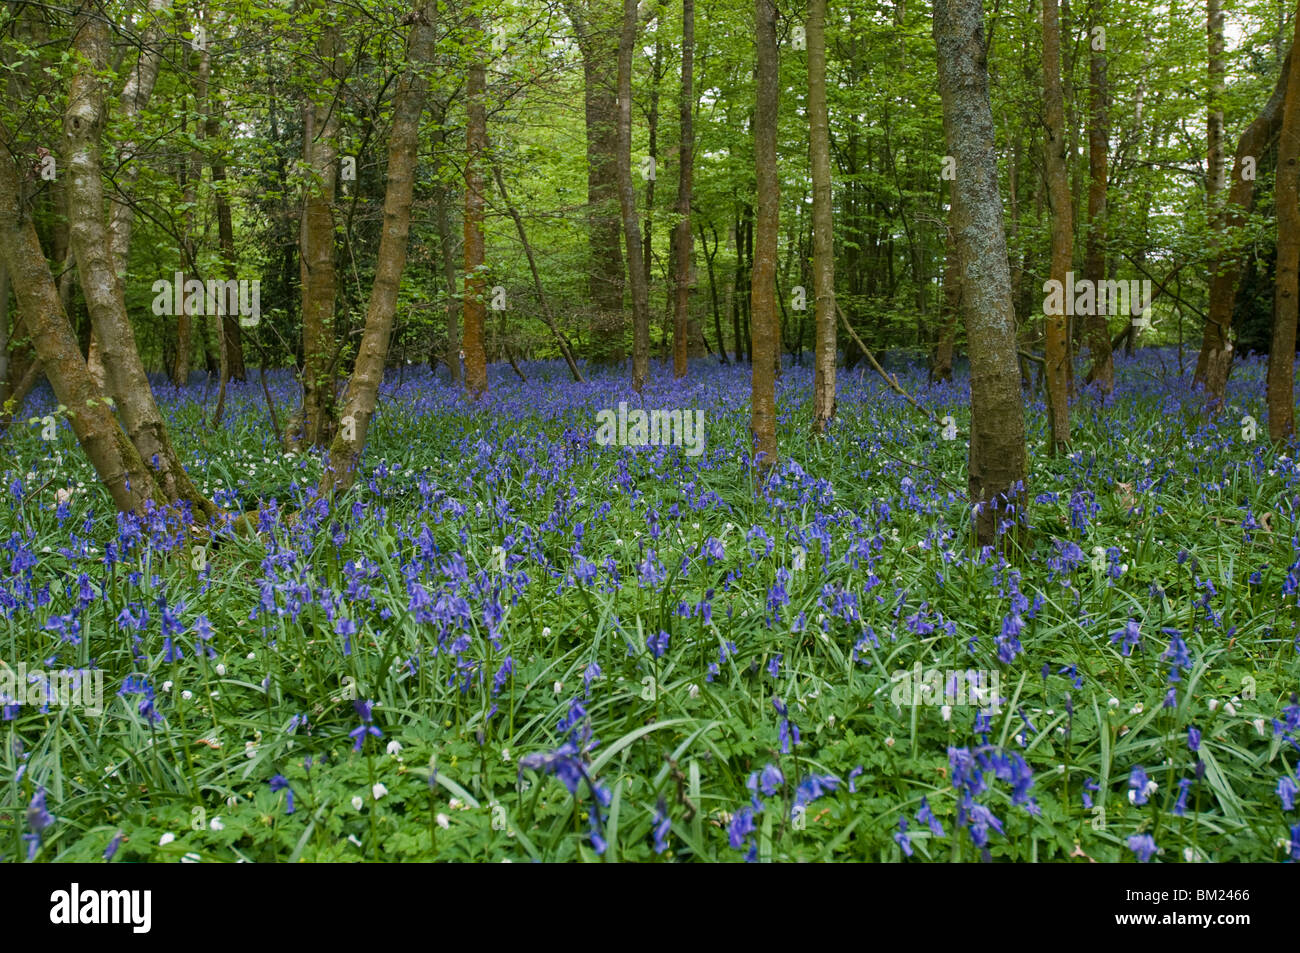 UNITED KINGDOM, ENGLAND - Bluebells in a wood. Stock Photo